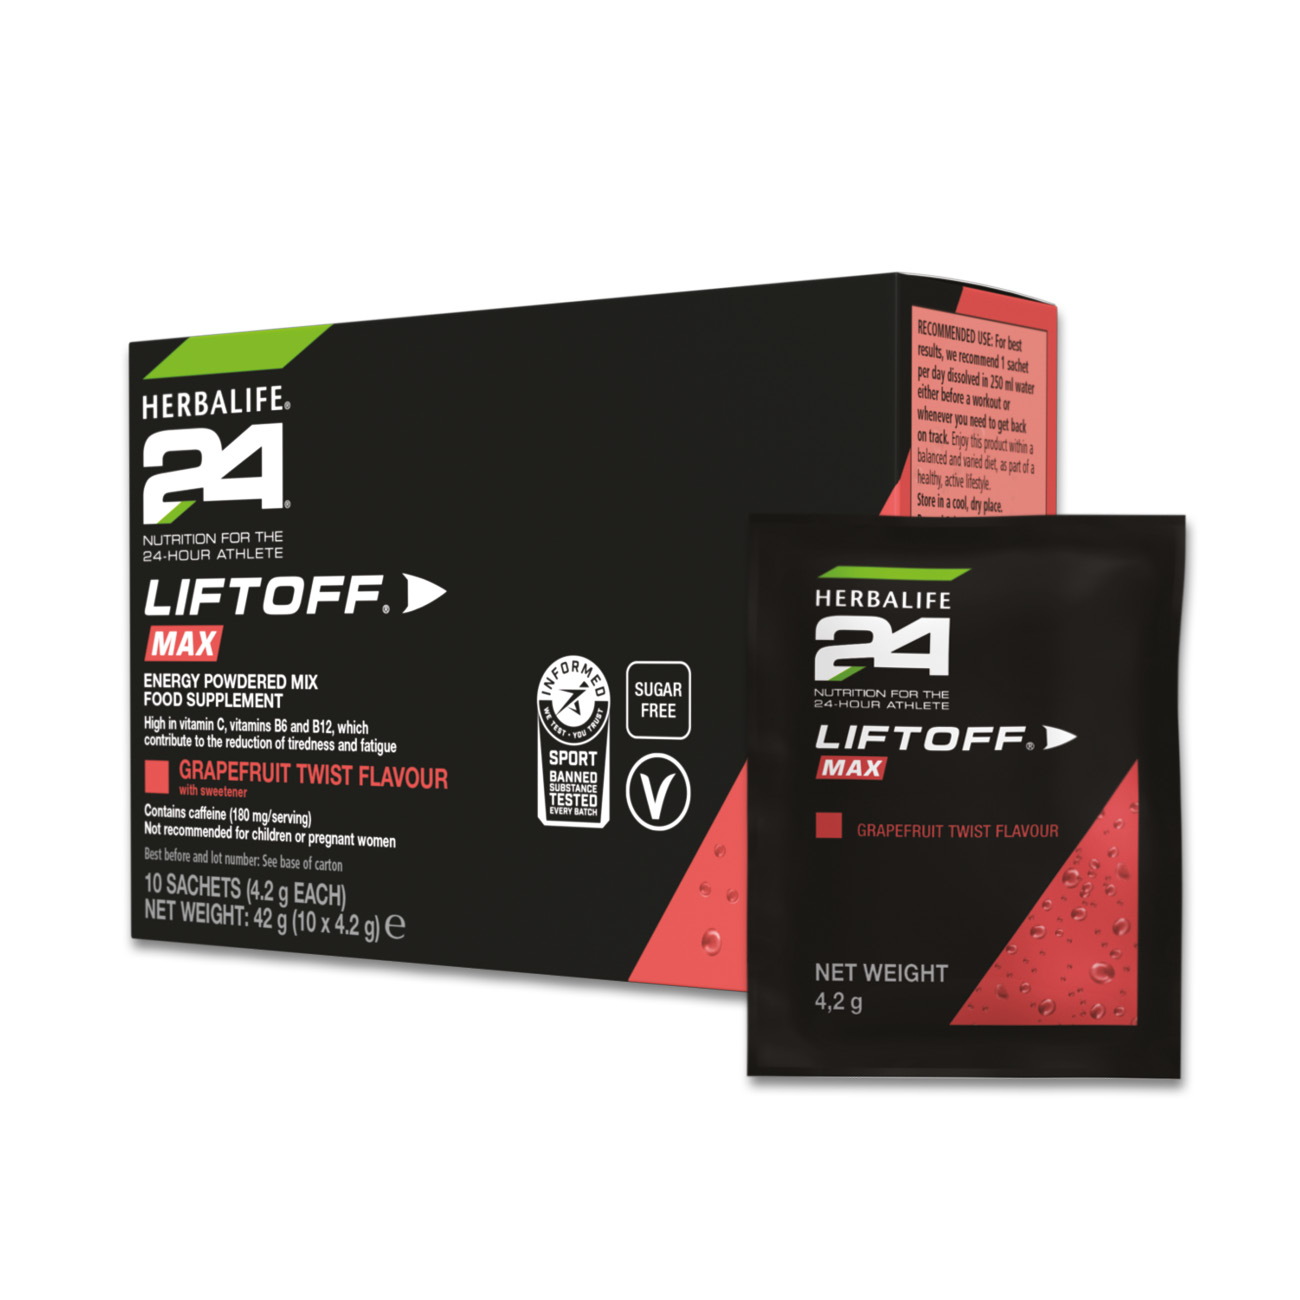 Herbalife24® LiftOff® Max is a sugar-free energy drink that comes in a box of 10 individual sachets and is great to have when you’re on-the-go.